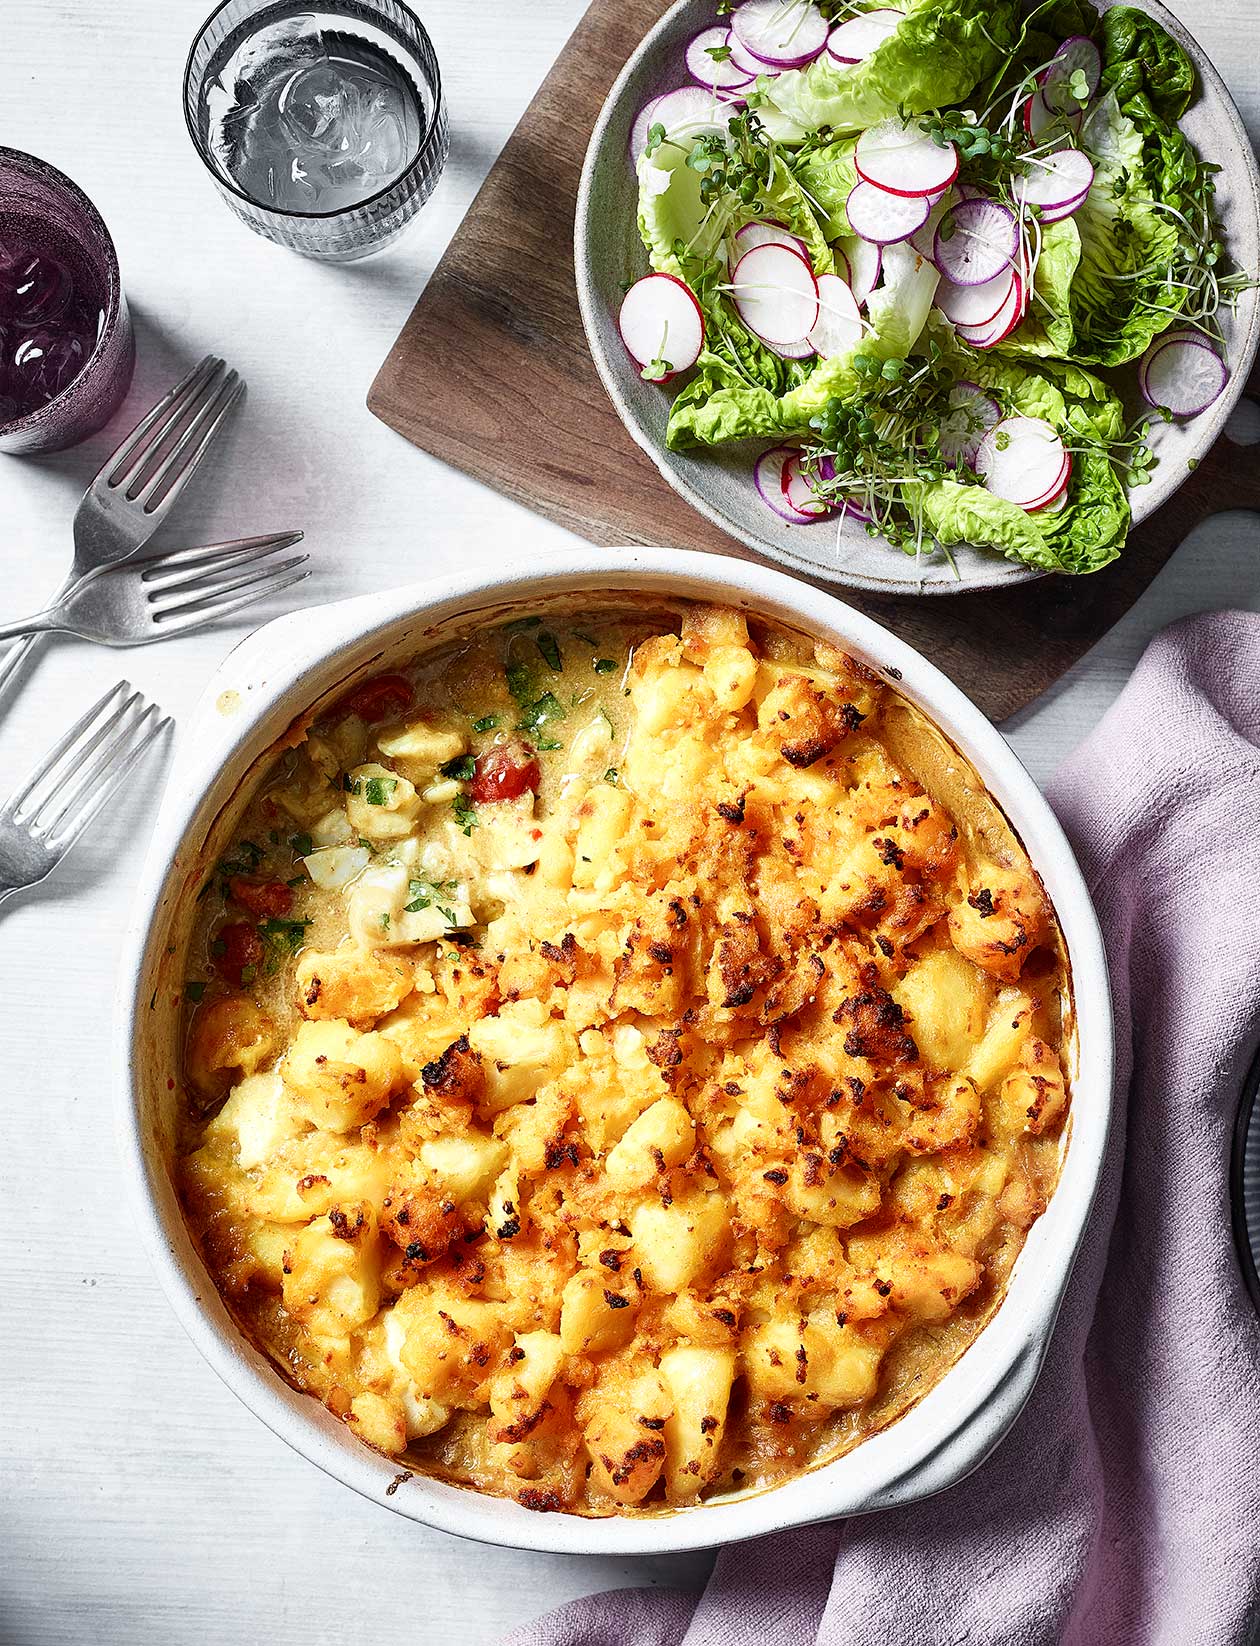 Curried fish pie with spiced potato topping recipe | Sainsbury`s Magazine